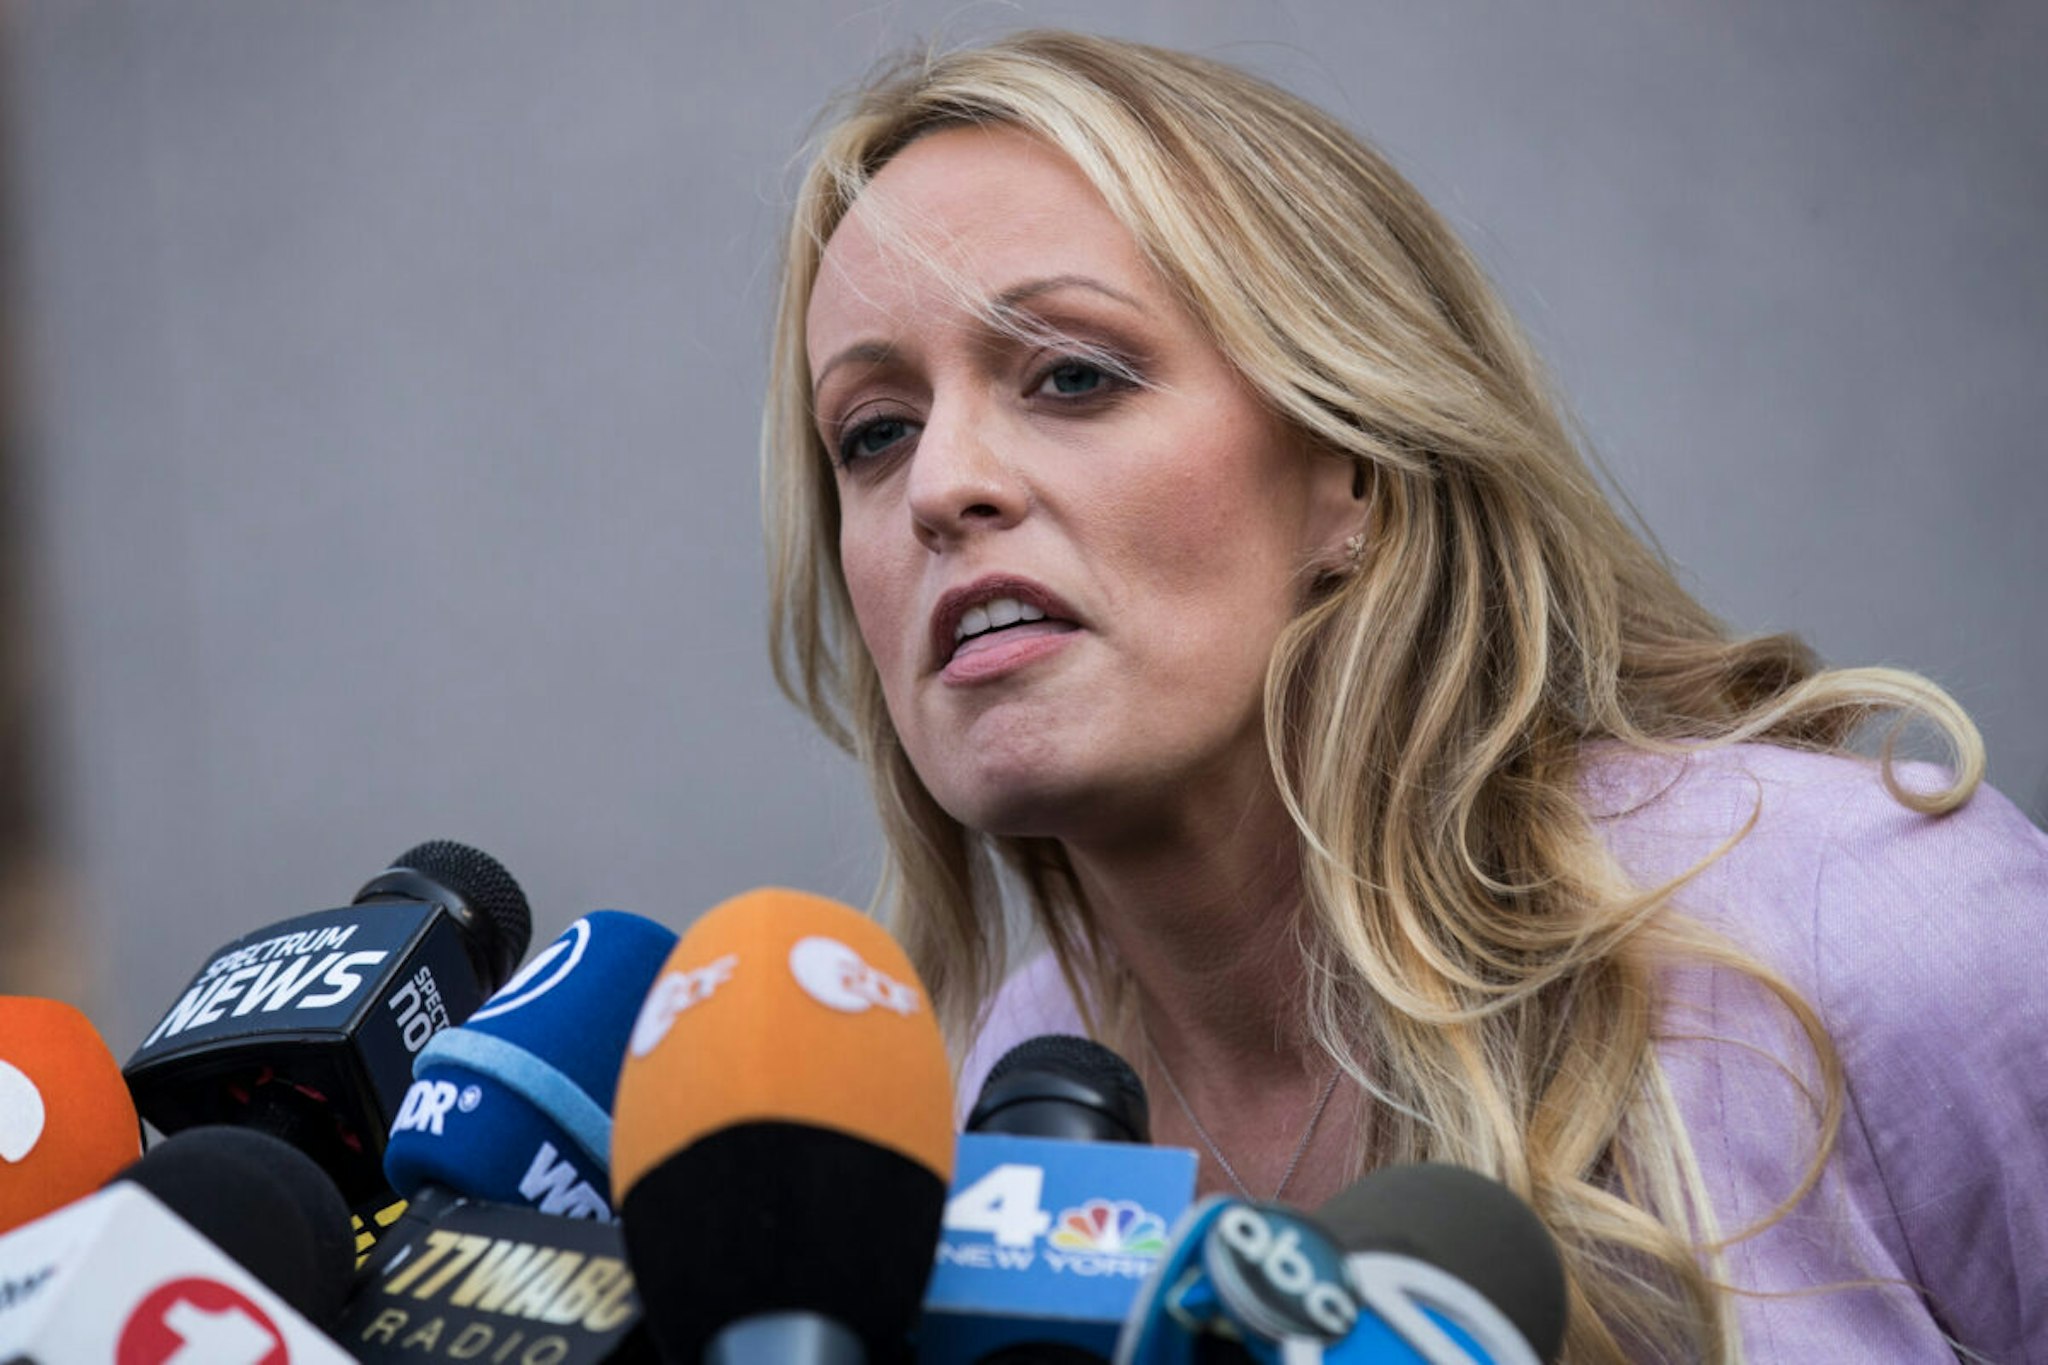 Adult film actress Stormy Daniels (Stephanie Clifford) speaks to reporters as she exits the United States District Court Southern District of New York for a hearing related to Michael Cohen, President Trump's longtime personal attorney and confidante, April 16, 2018 in New York City.